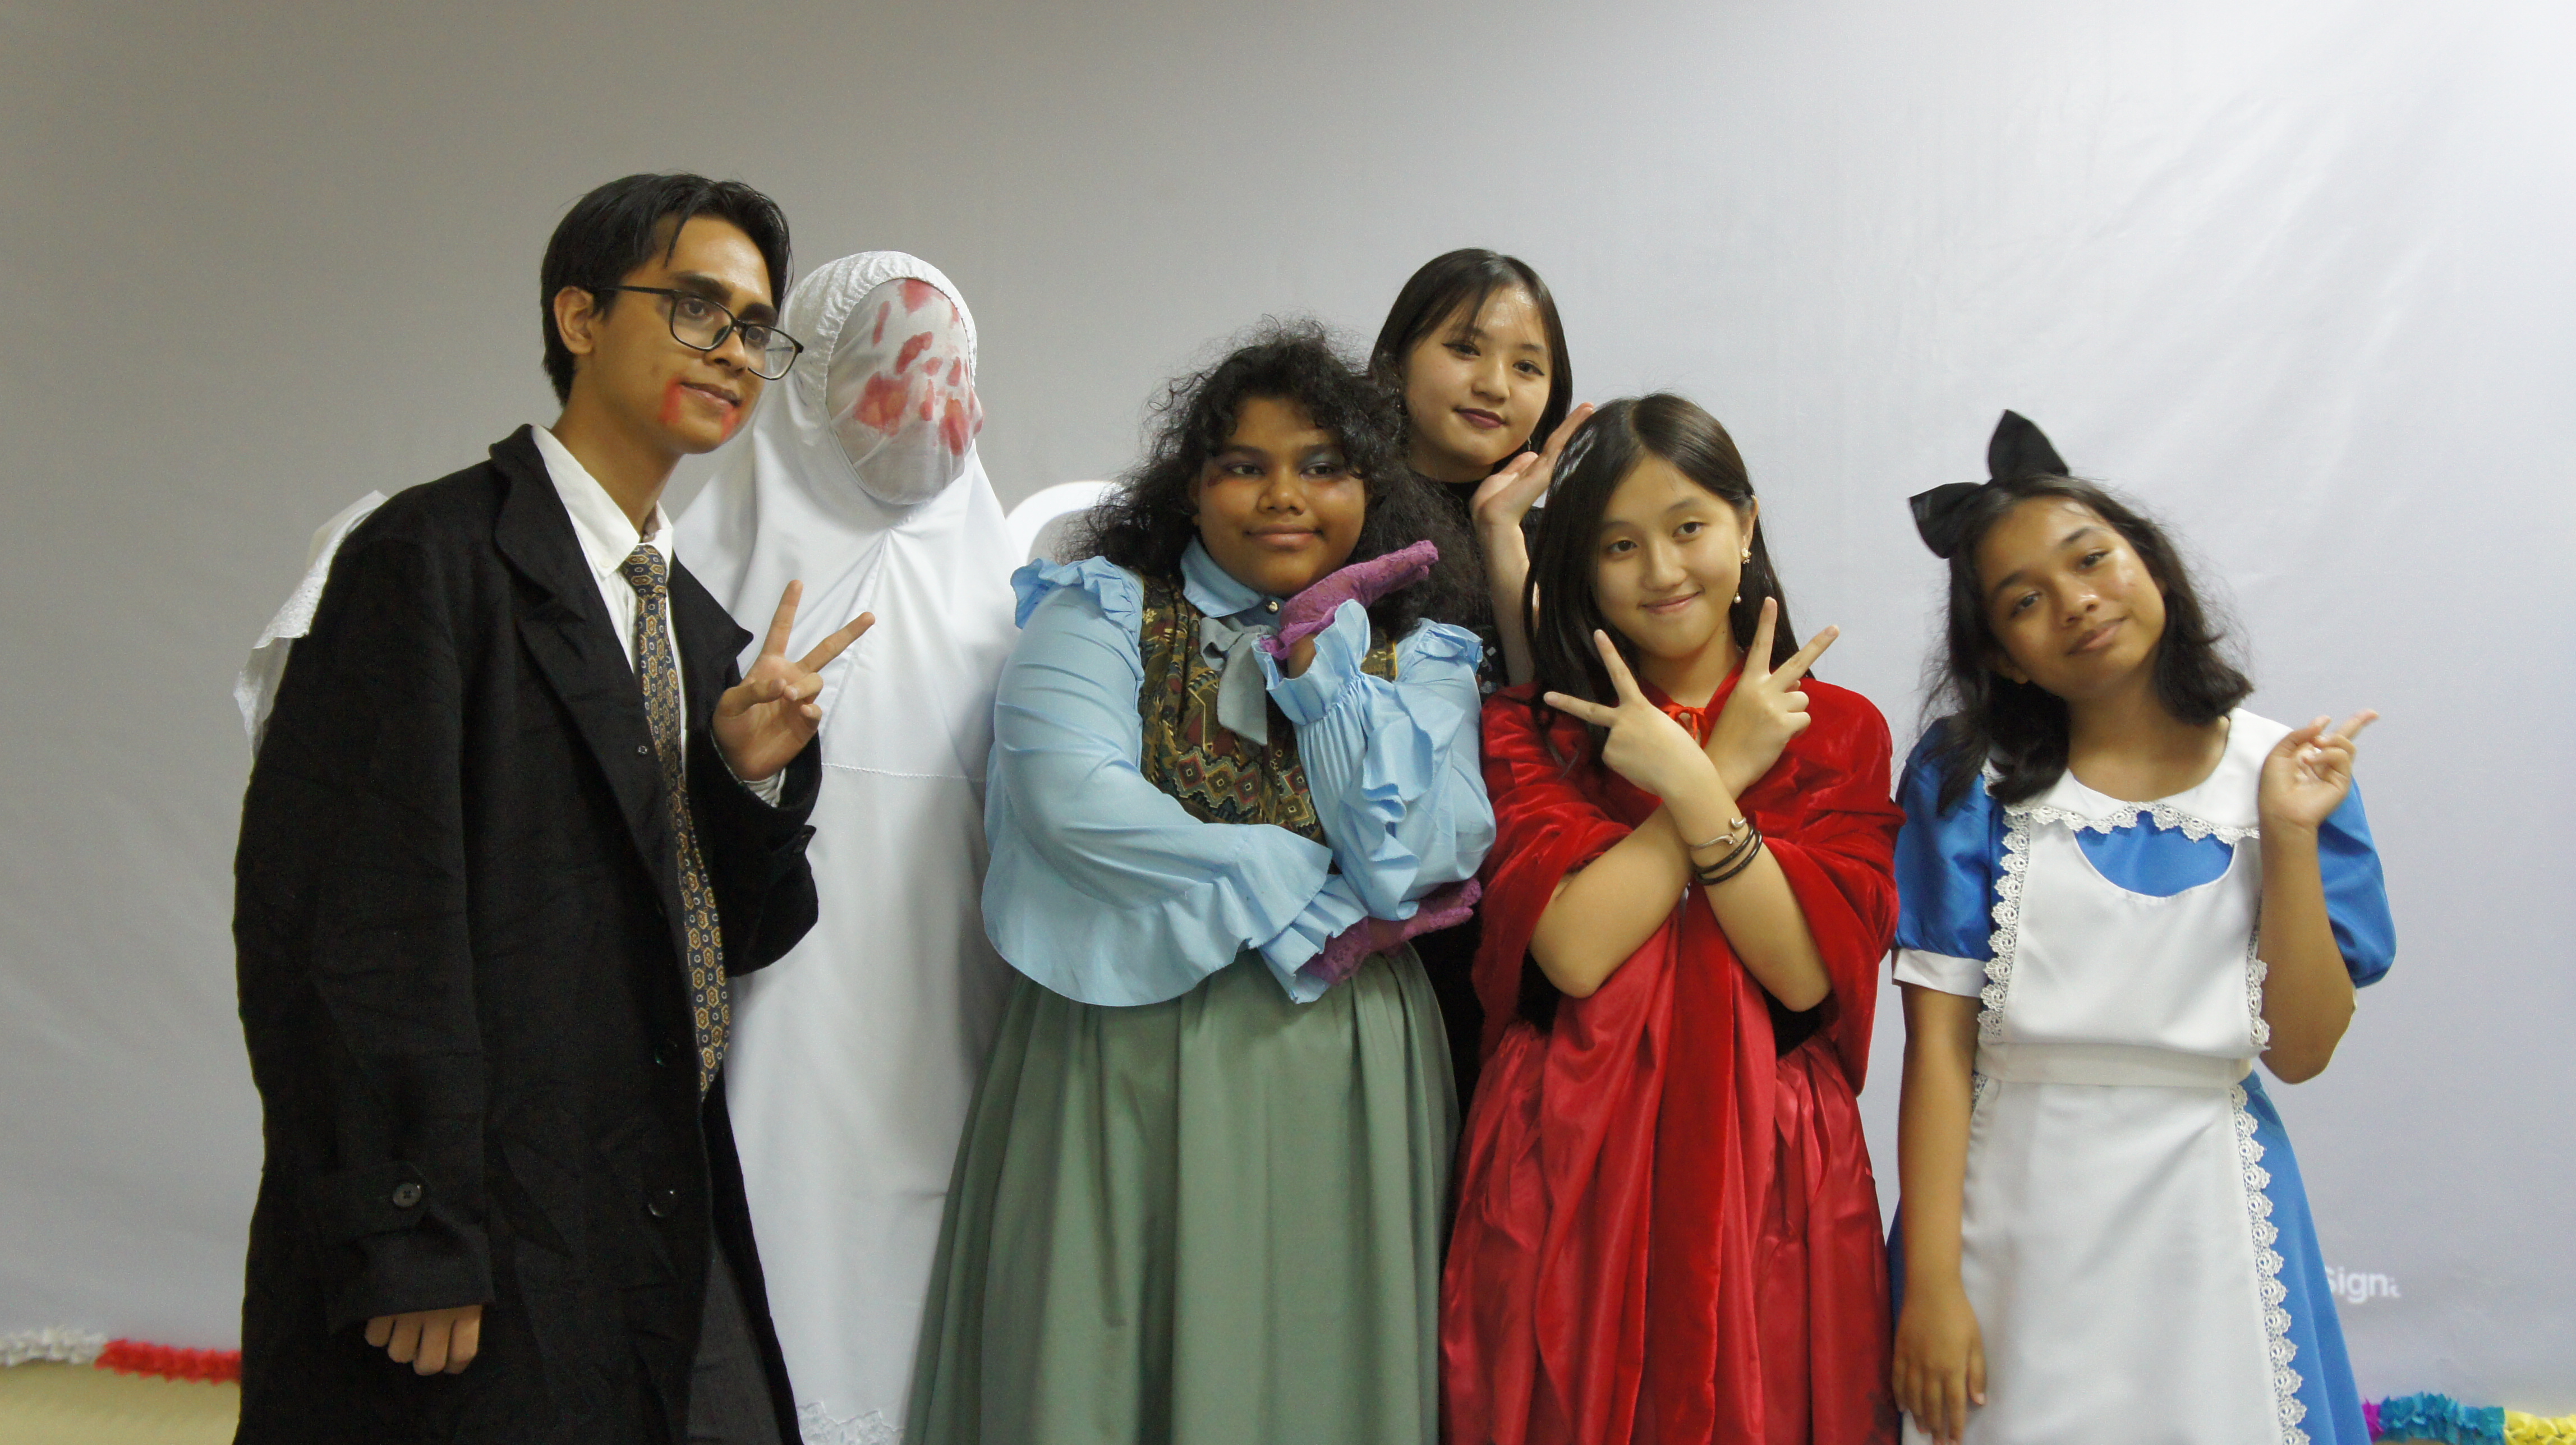 Students in their costumes